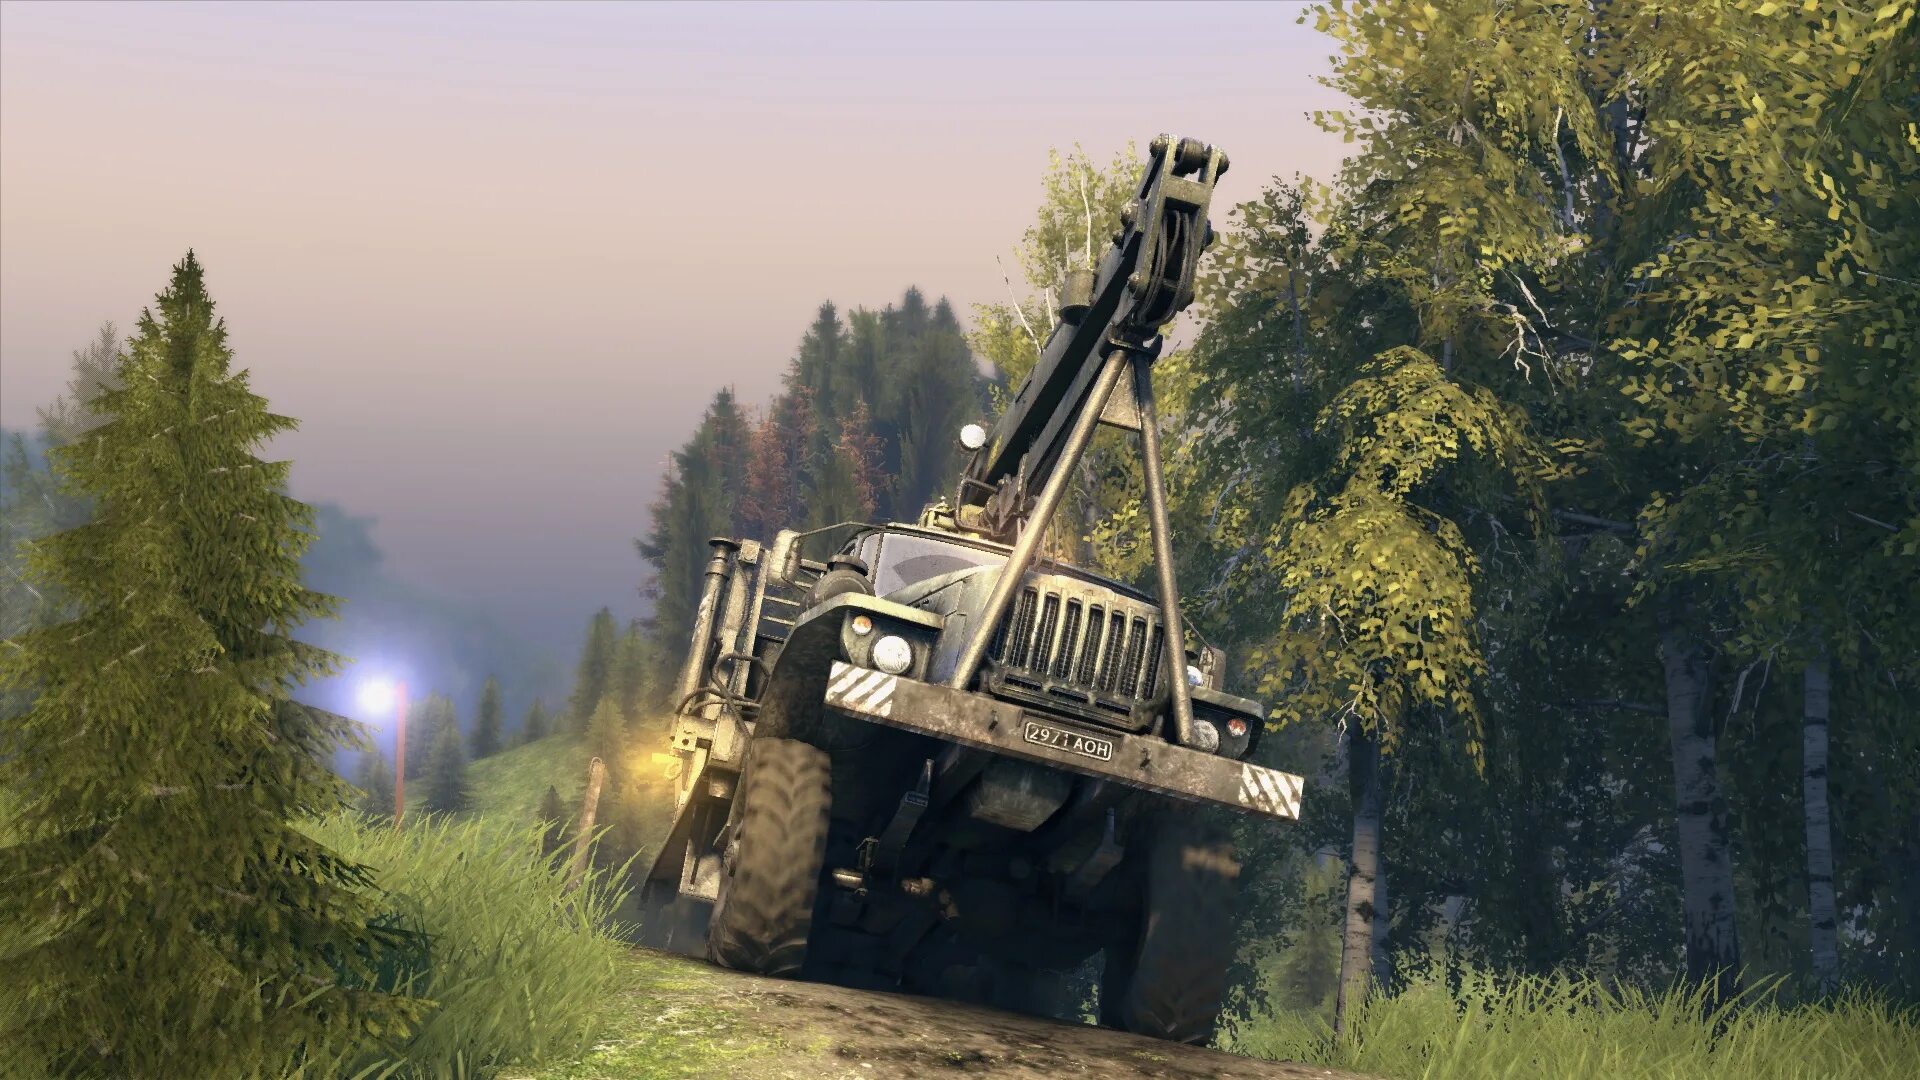 SPINTIRES. SPINTIRES: MUDRUNNER. МТЗ 50 Spin Tires. Spin Tires MUDRUNNER Урал 4320.